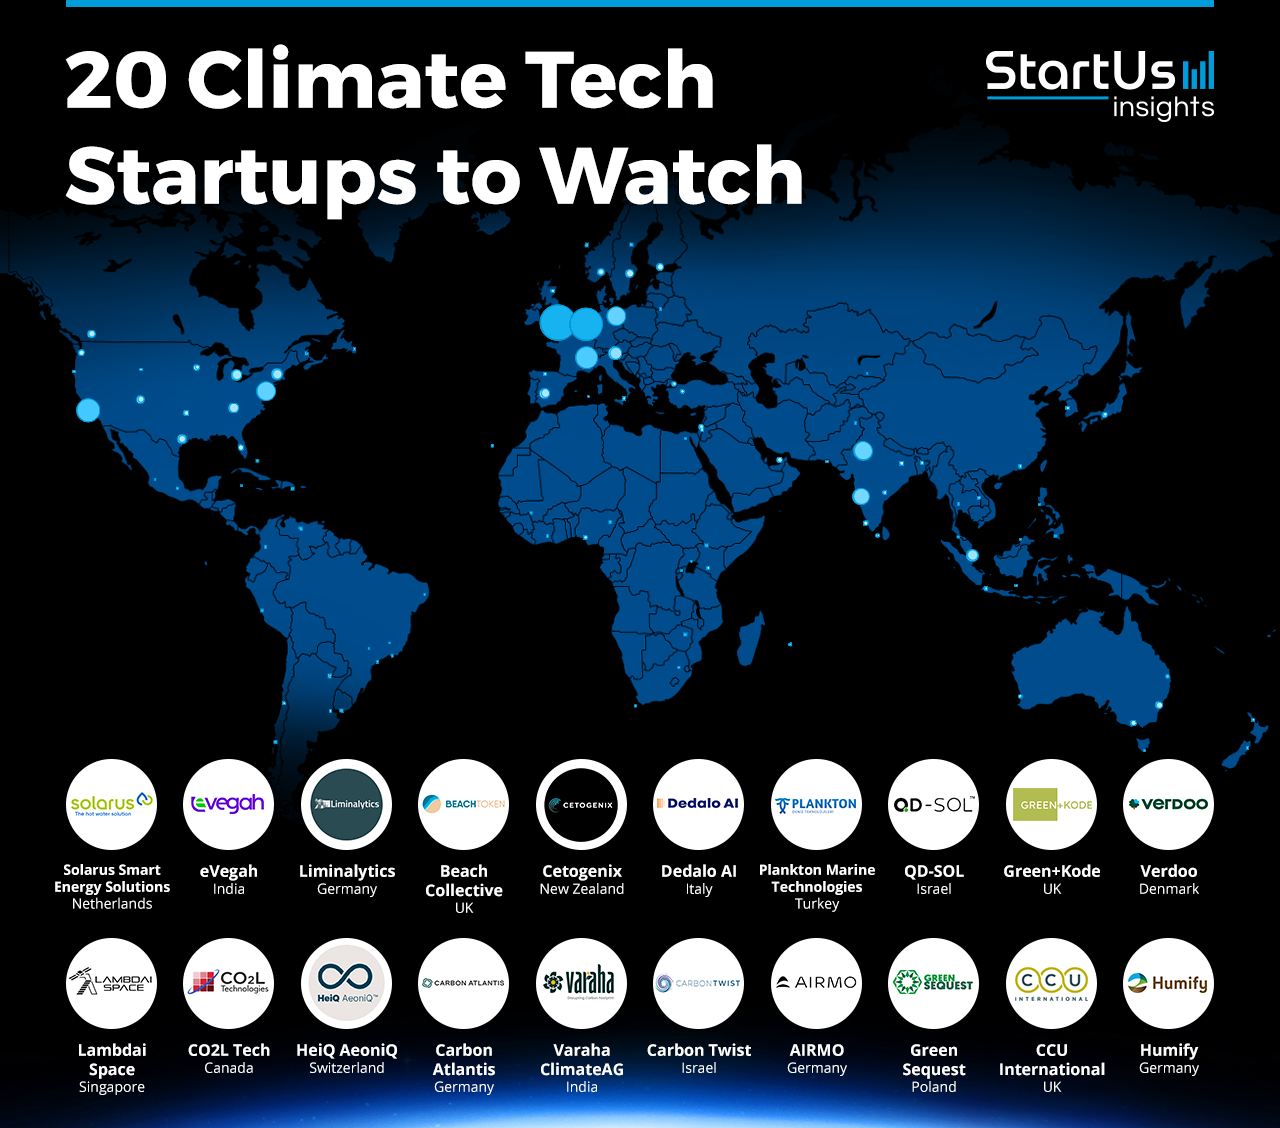 Green Sequest has been recognized as one of the “20 Climate Tech Startups to Watch in 2024”